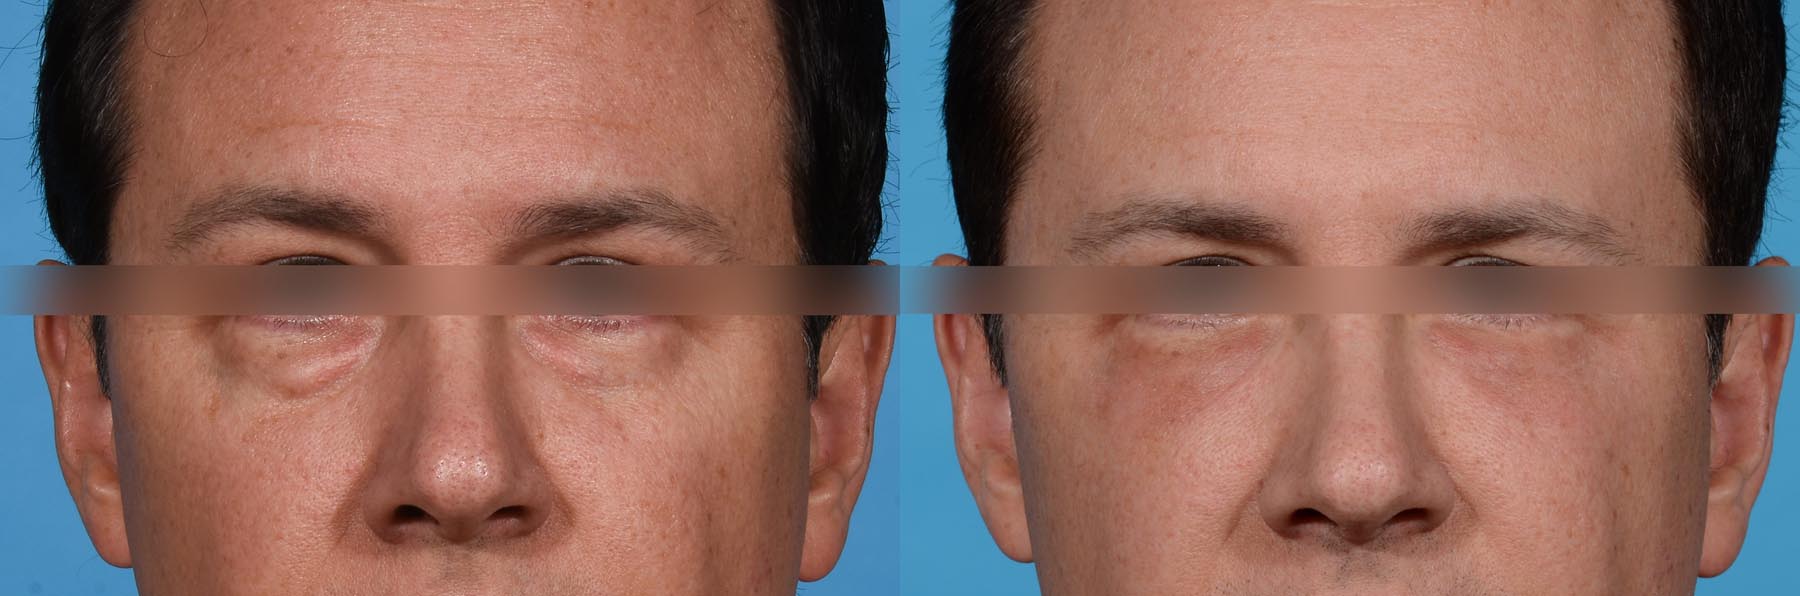 Eyelid Lift Before and After Photo by Sculpt Aesthetic Center in Frisco, TX